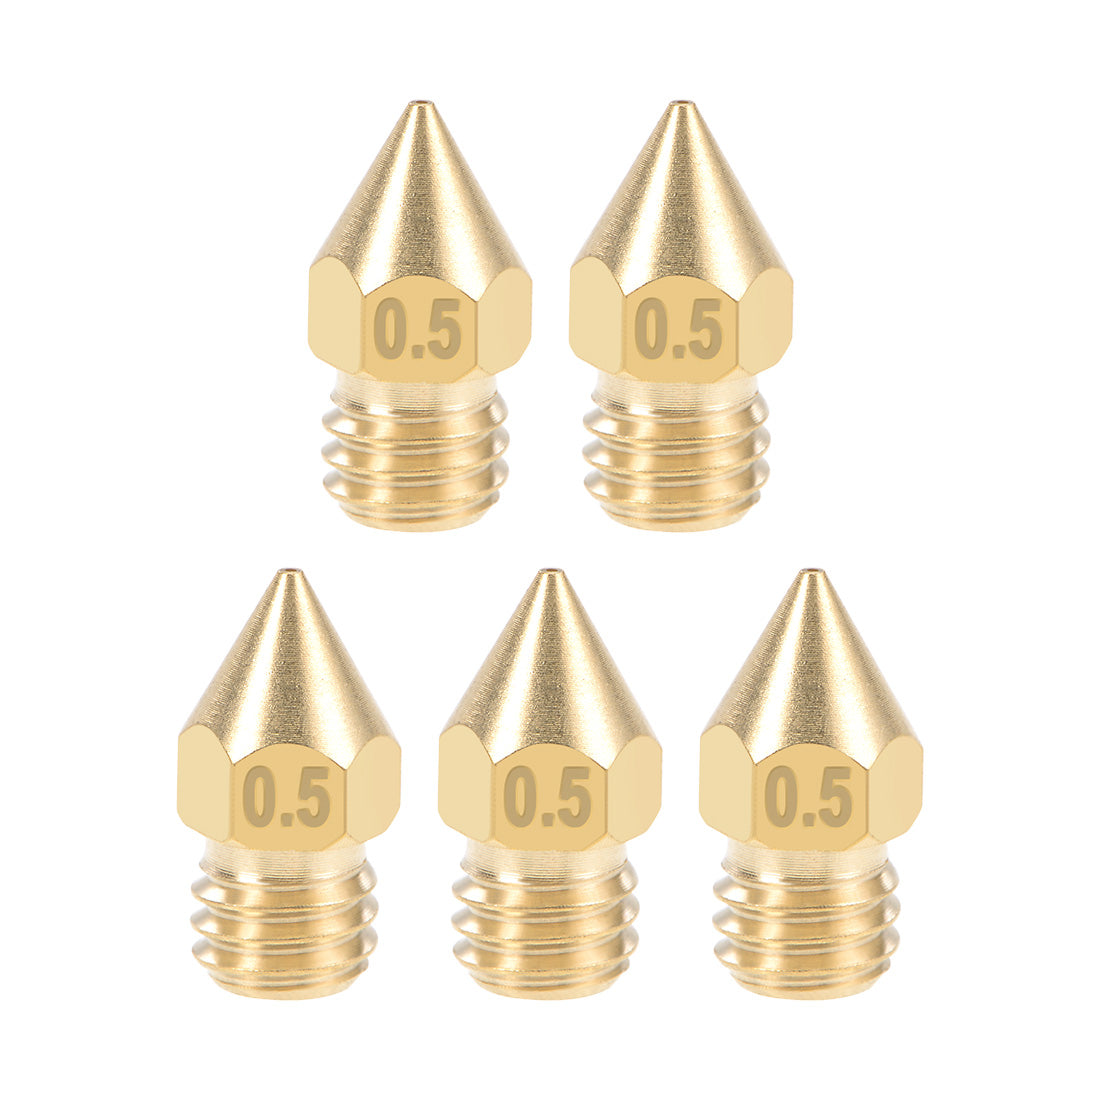 uxcell Uxcell 0.5mm 3D Printer Nozzle Head M6 for MK8 1.75mm Extruder Print, Brass 5pcs